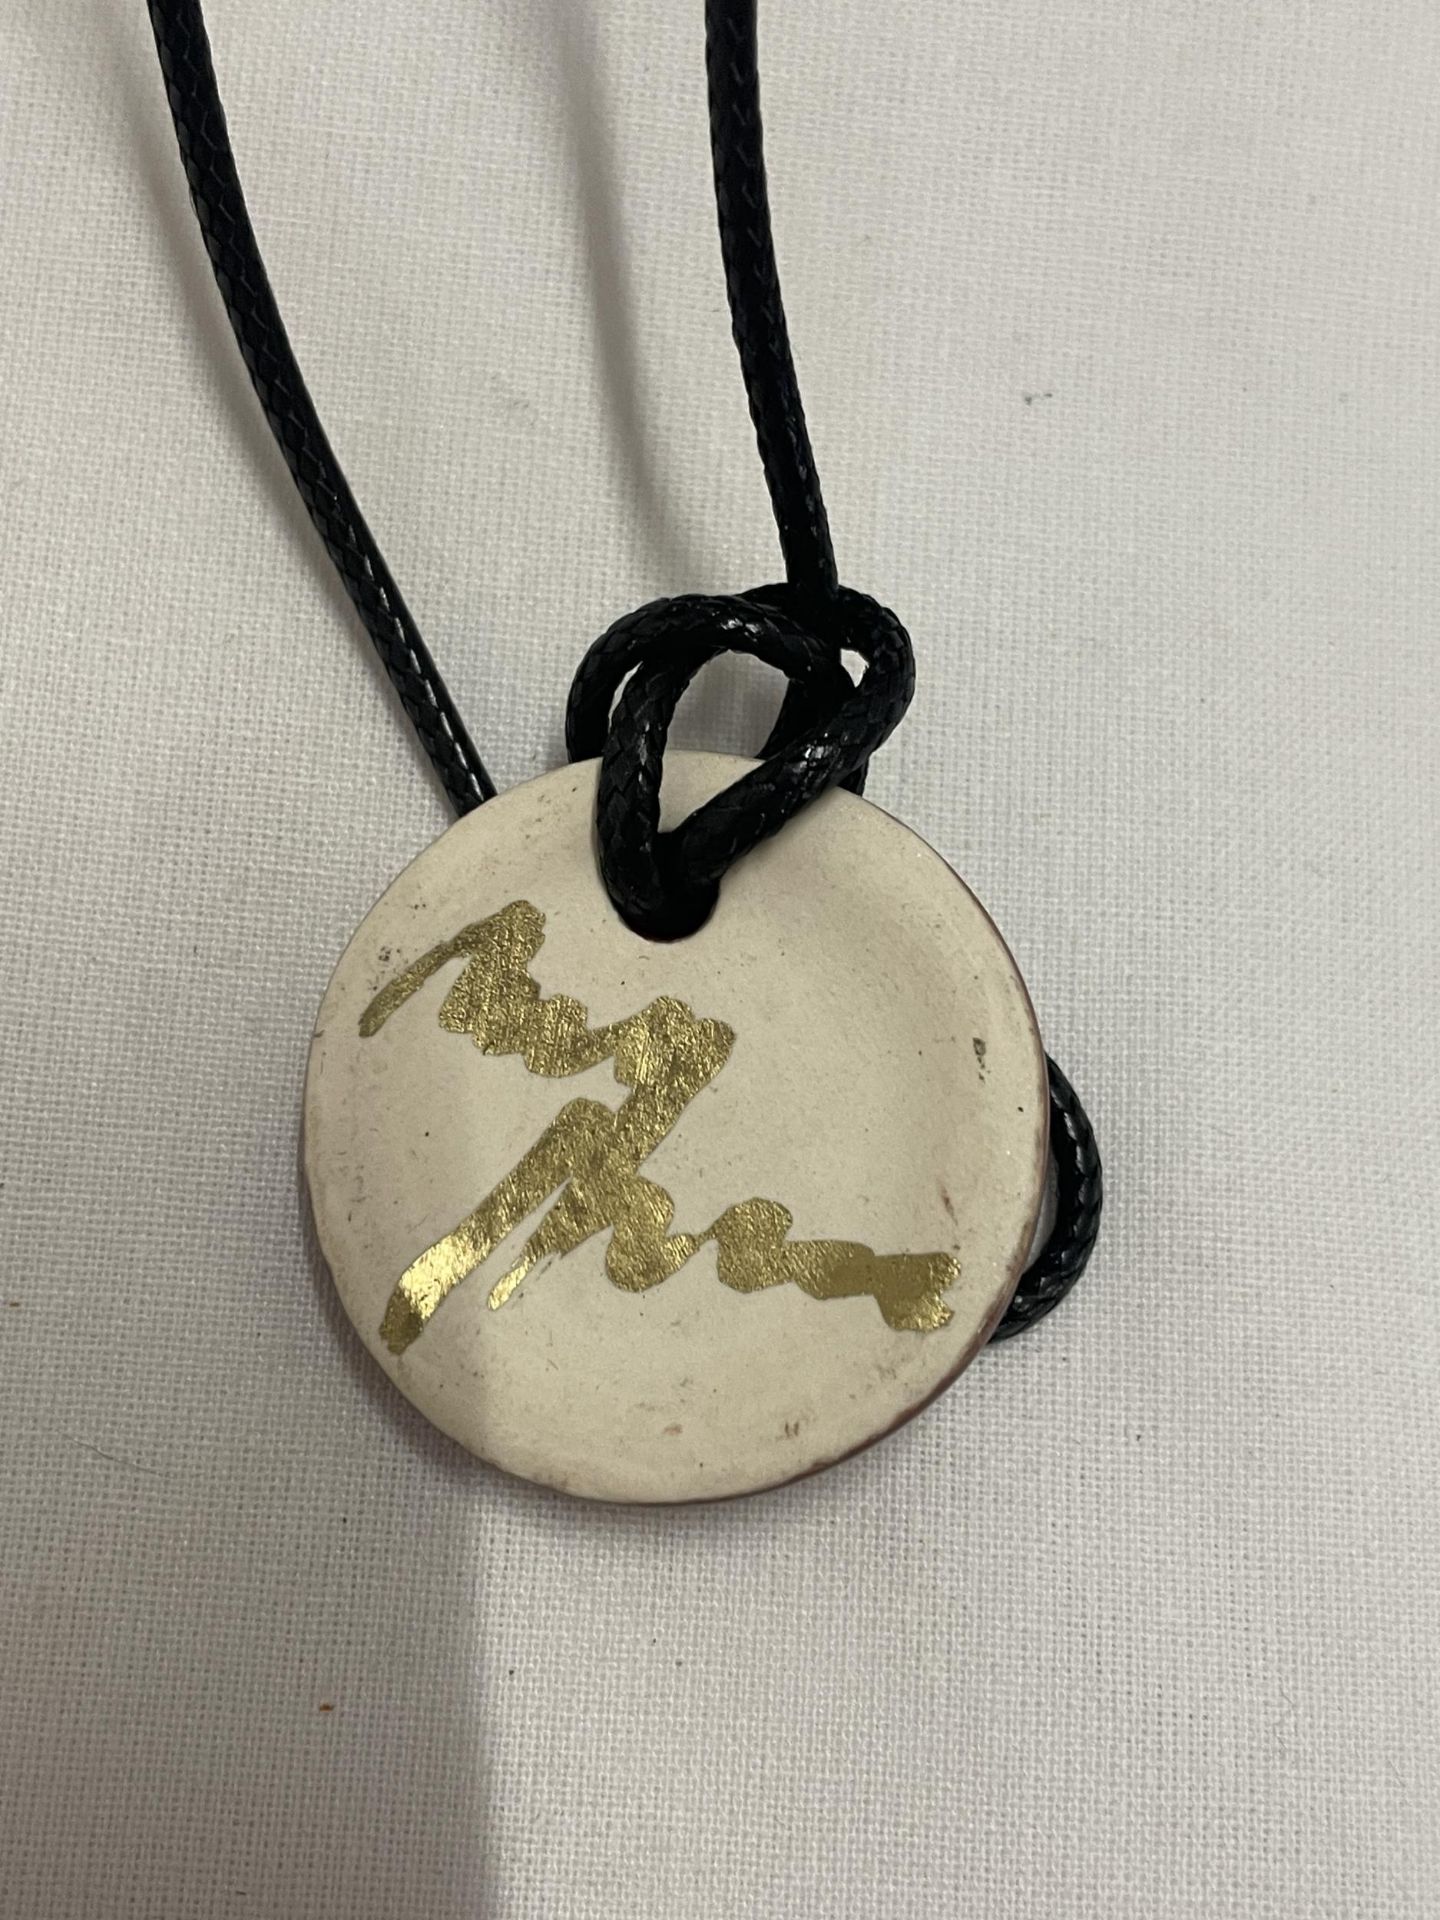 AN ANITA HARRIS HAND PAINTED AND SIGNED IN GOLD BOXED POPPY PENDANT - Image 3 of 3